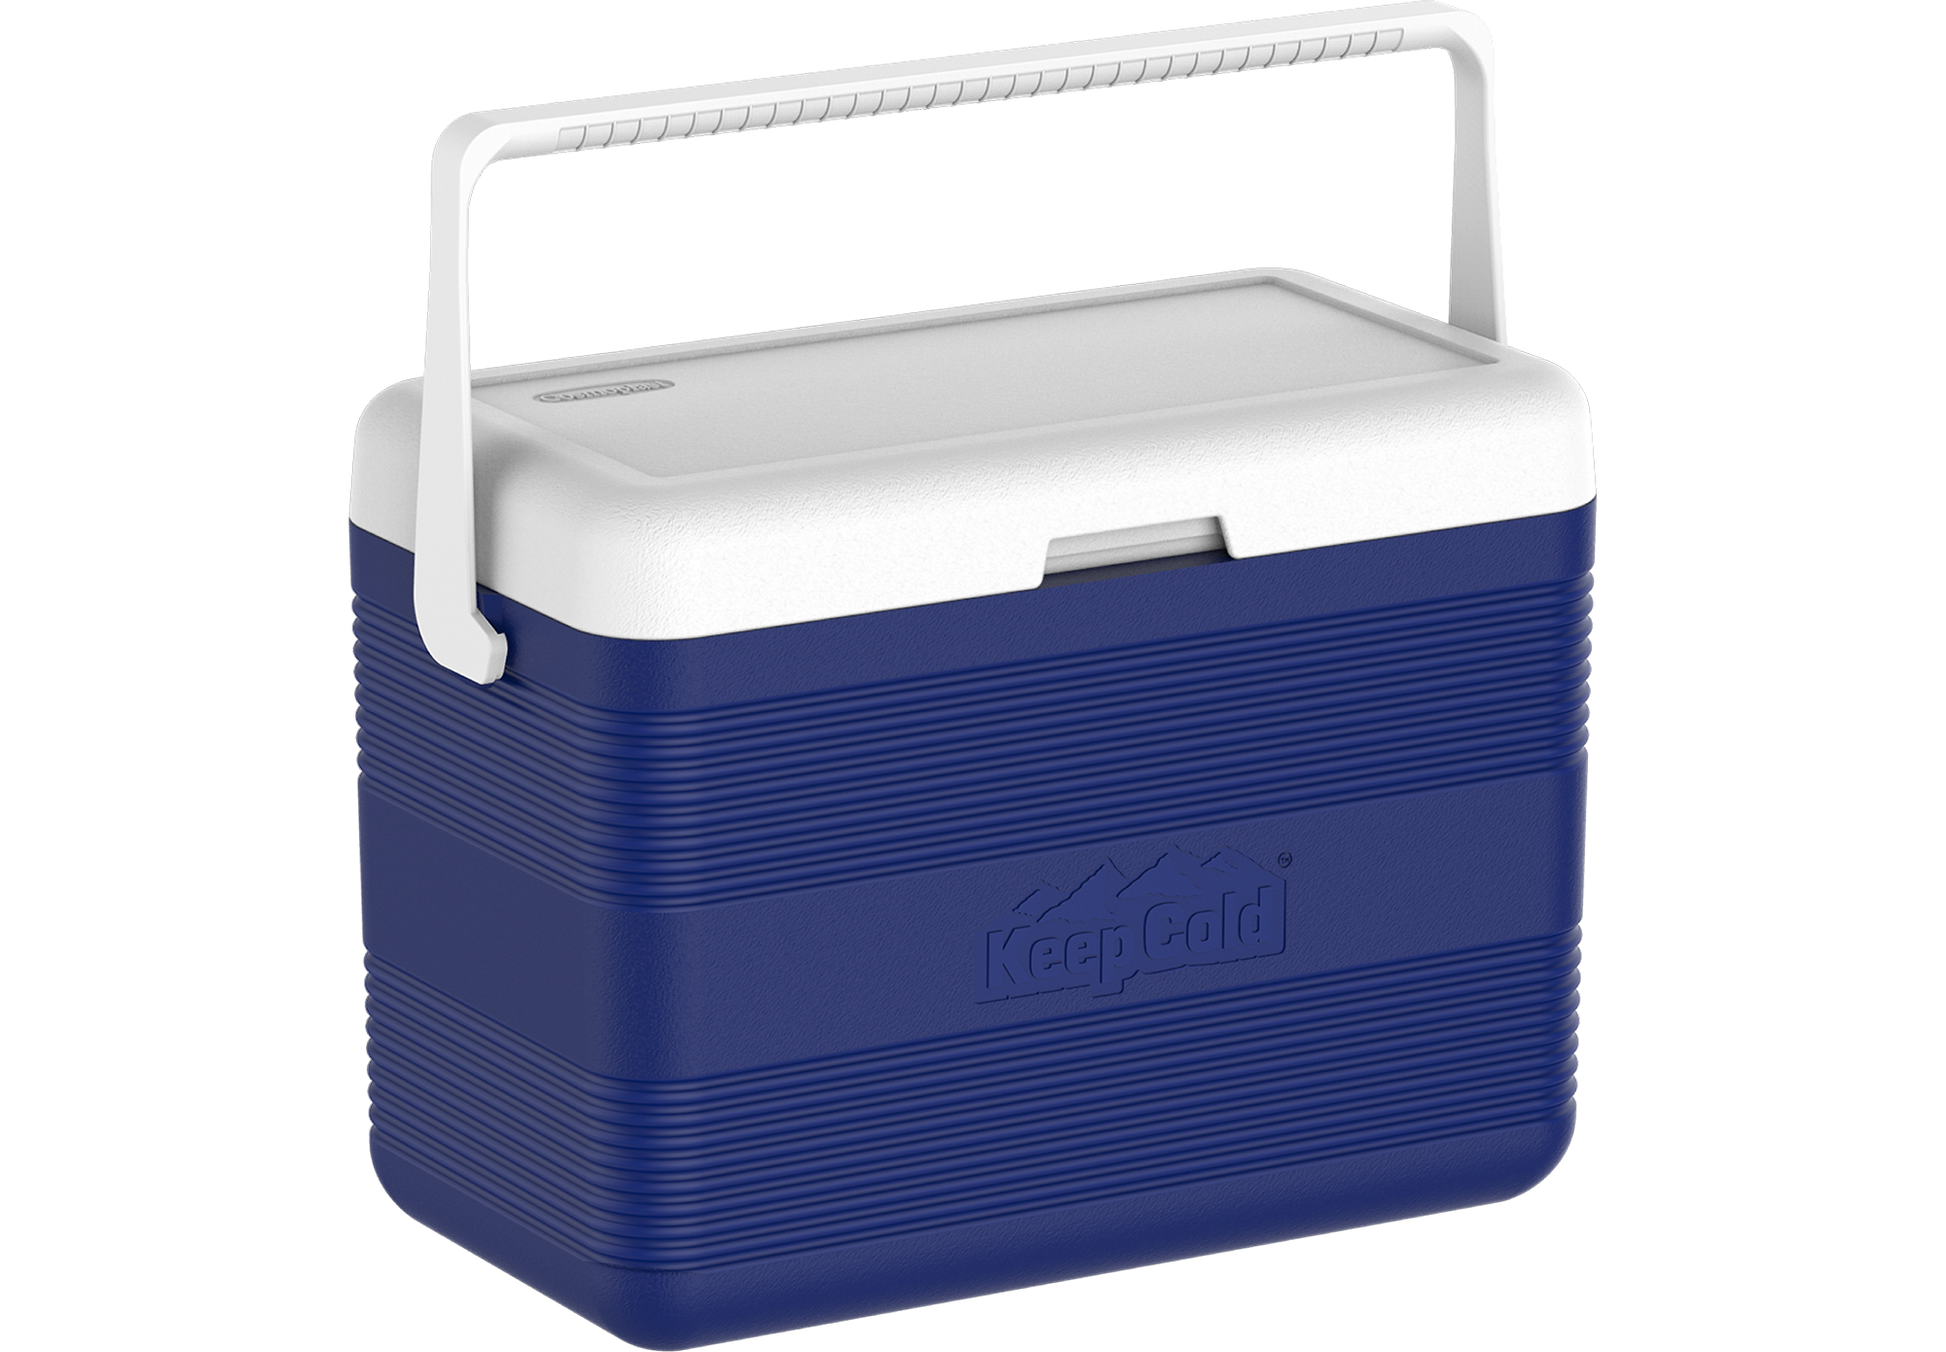 30L KeepCold Deluxe Icebox - Cosmoplast Bahrain